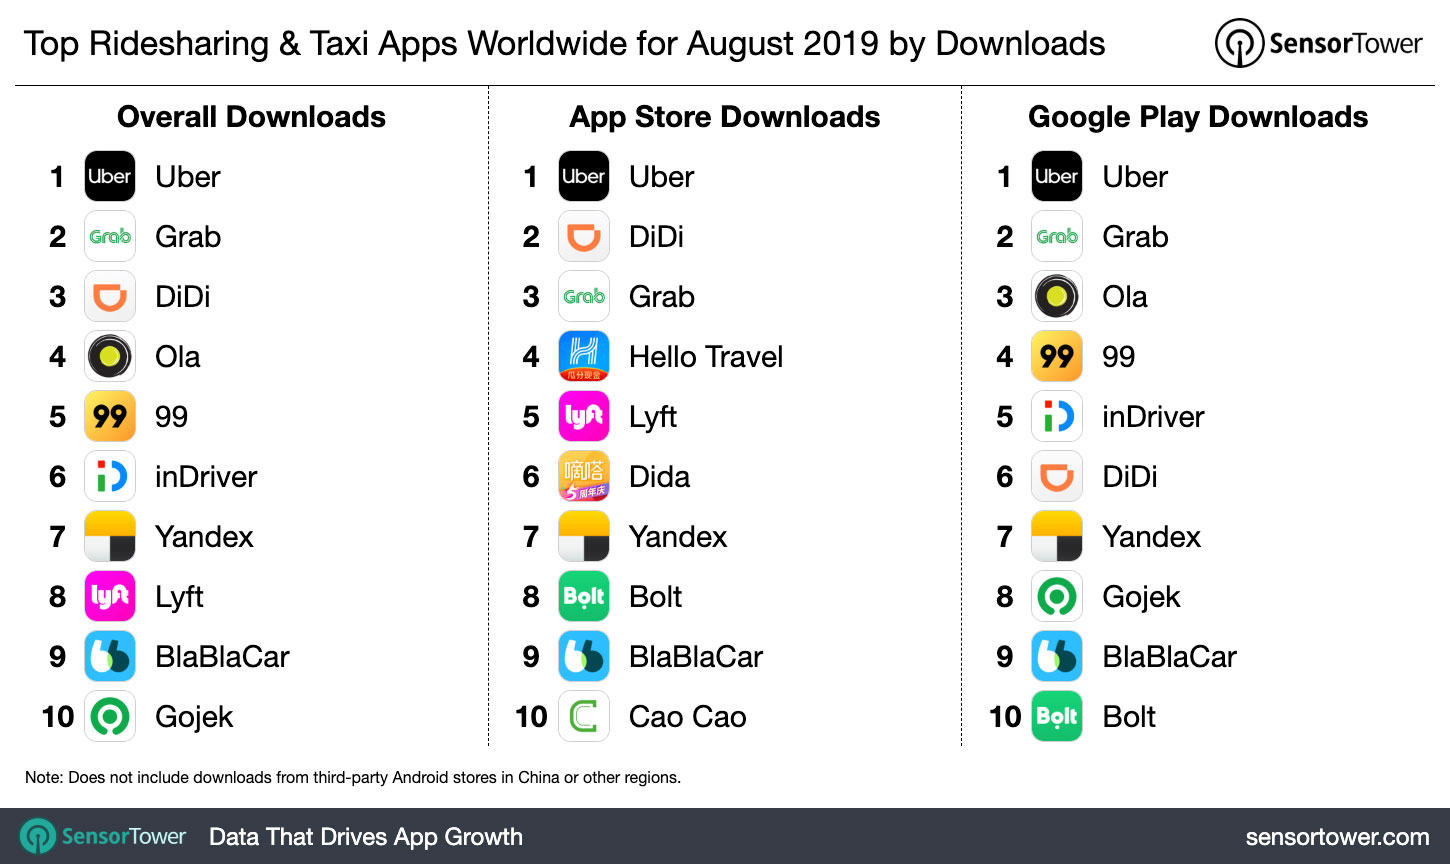 Top Ridesharing & Taxi Apps Worldwide for August 2019 by Downloads